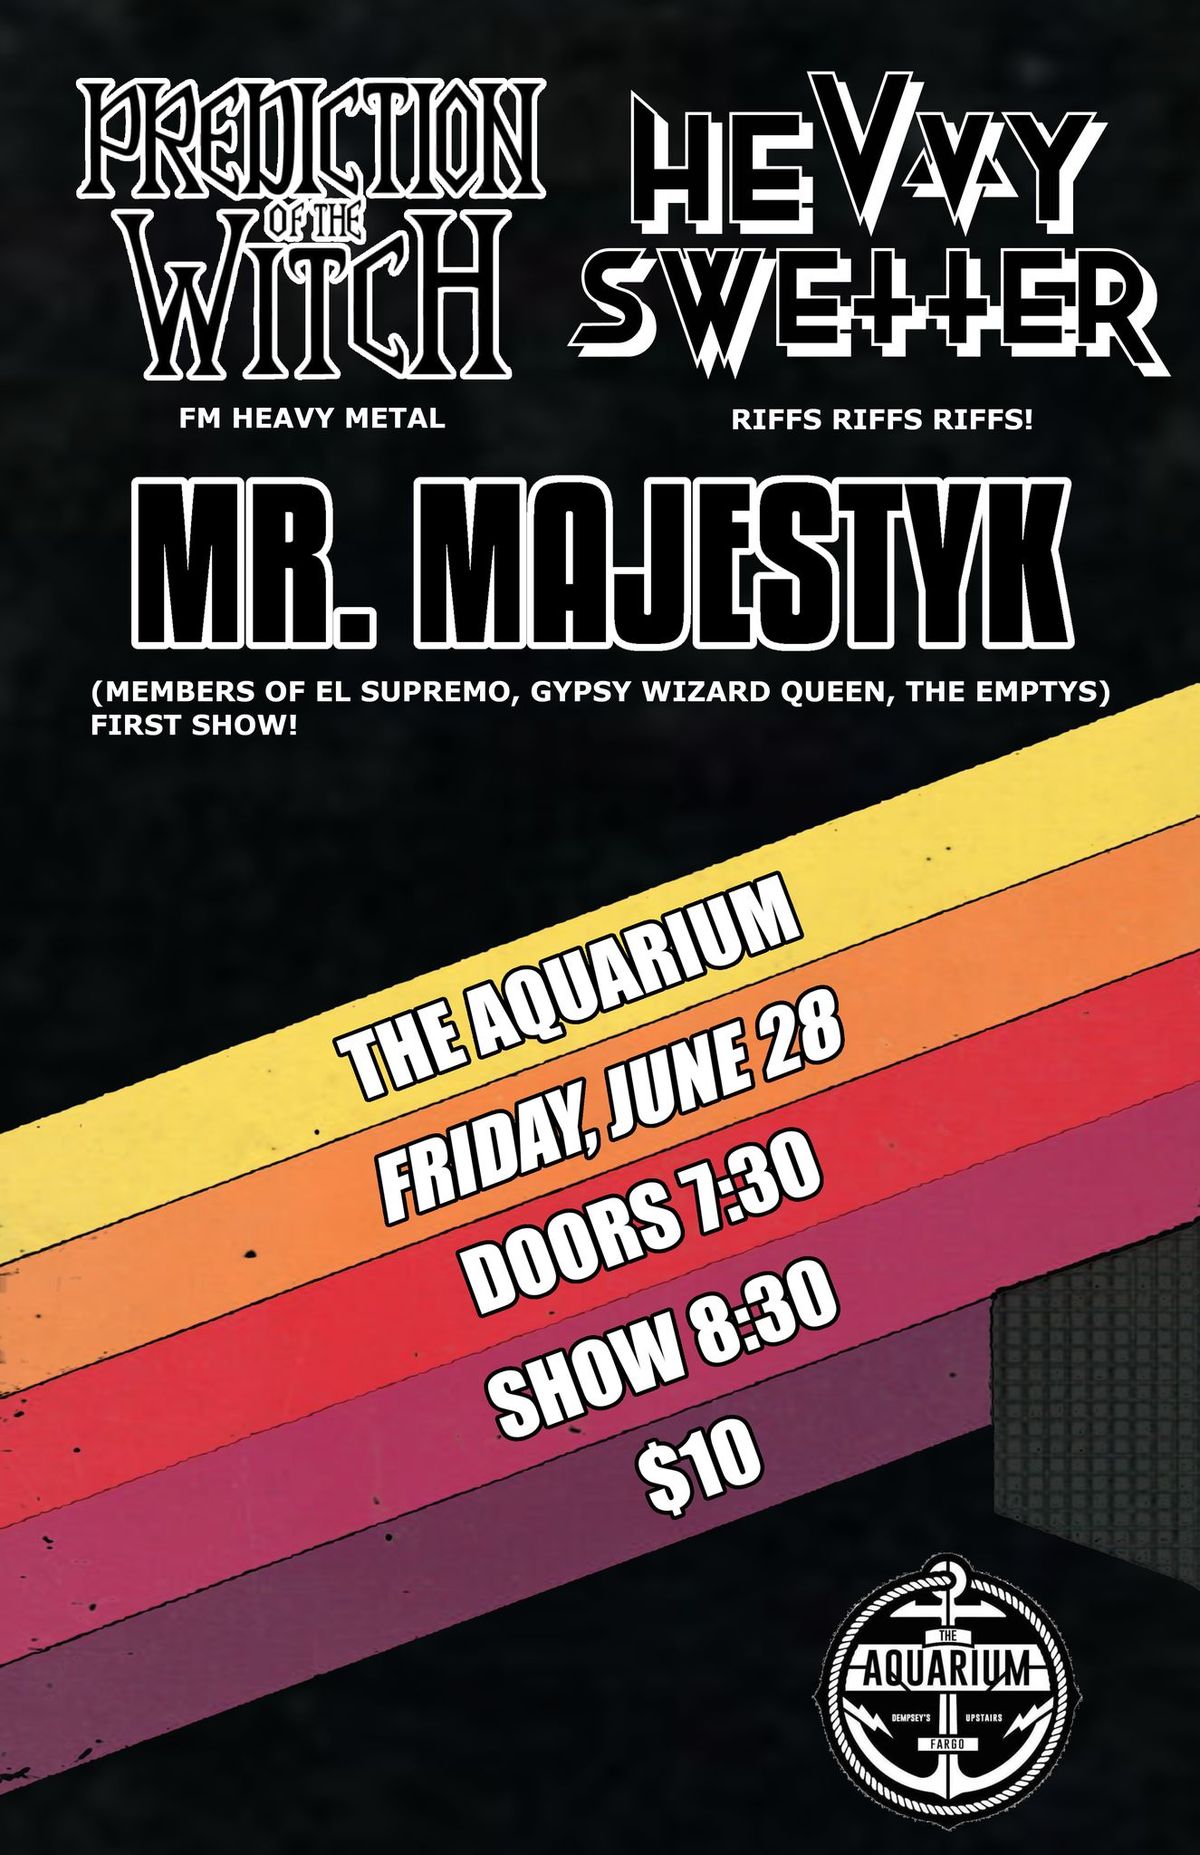 Mr. Majestyk debut show! w\/ Prediction of the Witch and Hevvy Swetter